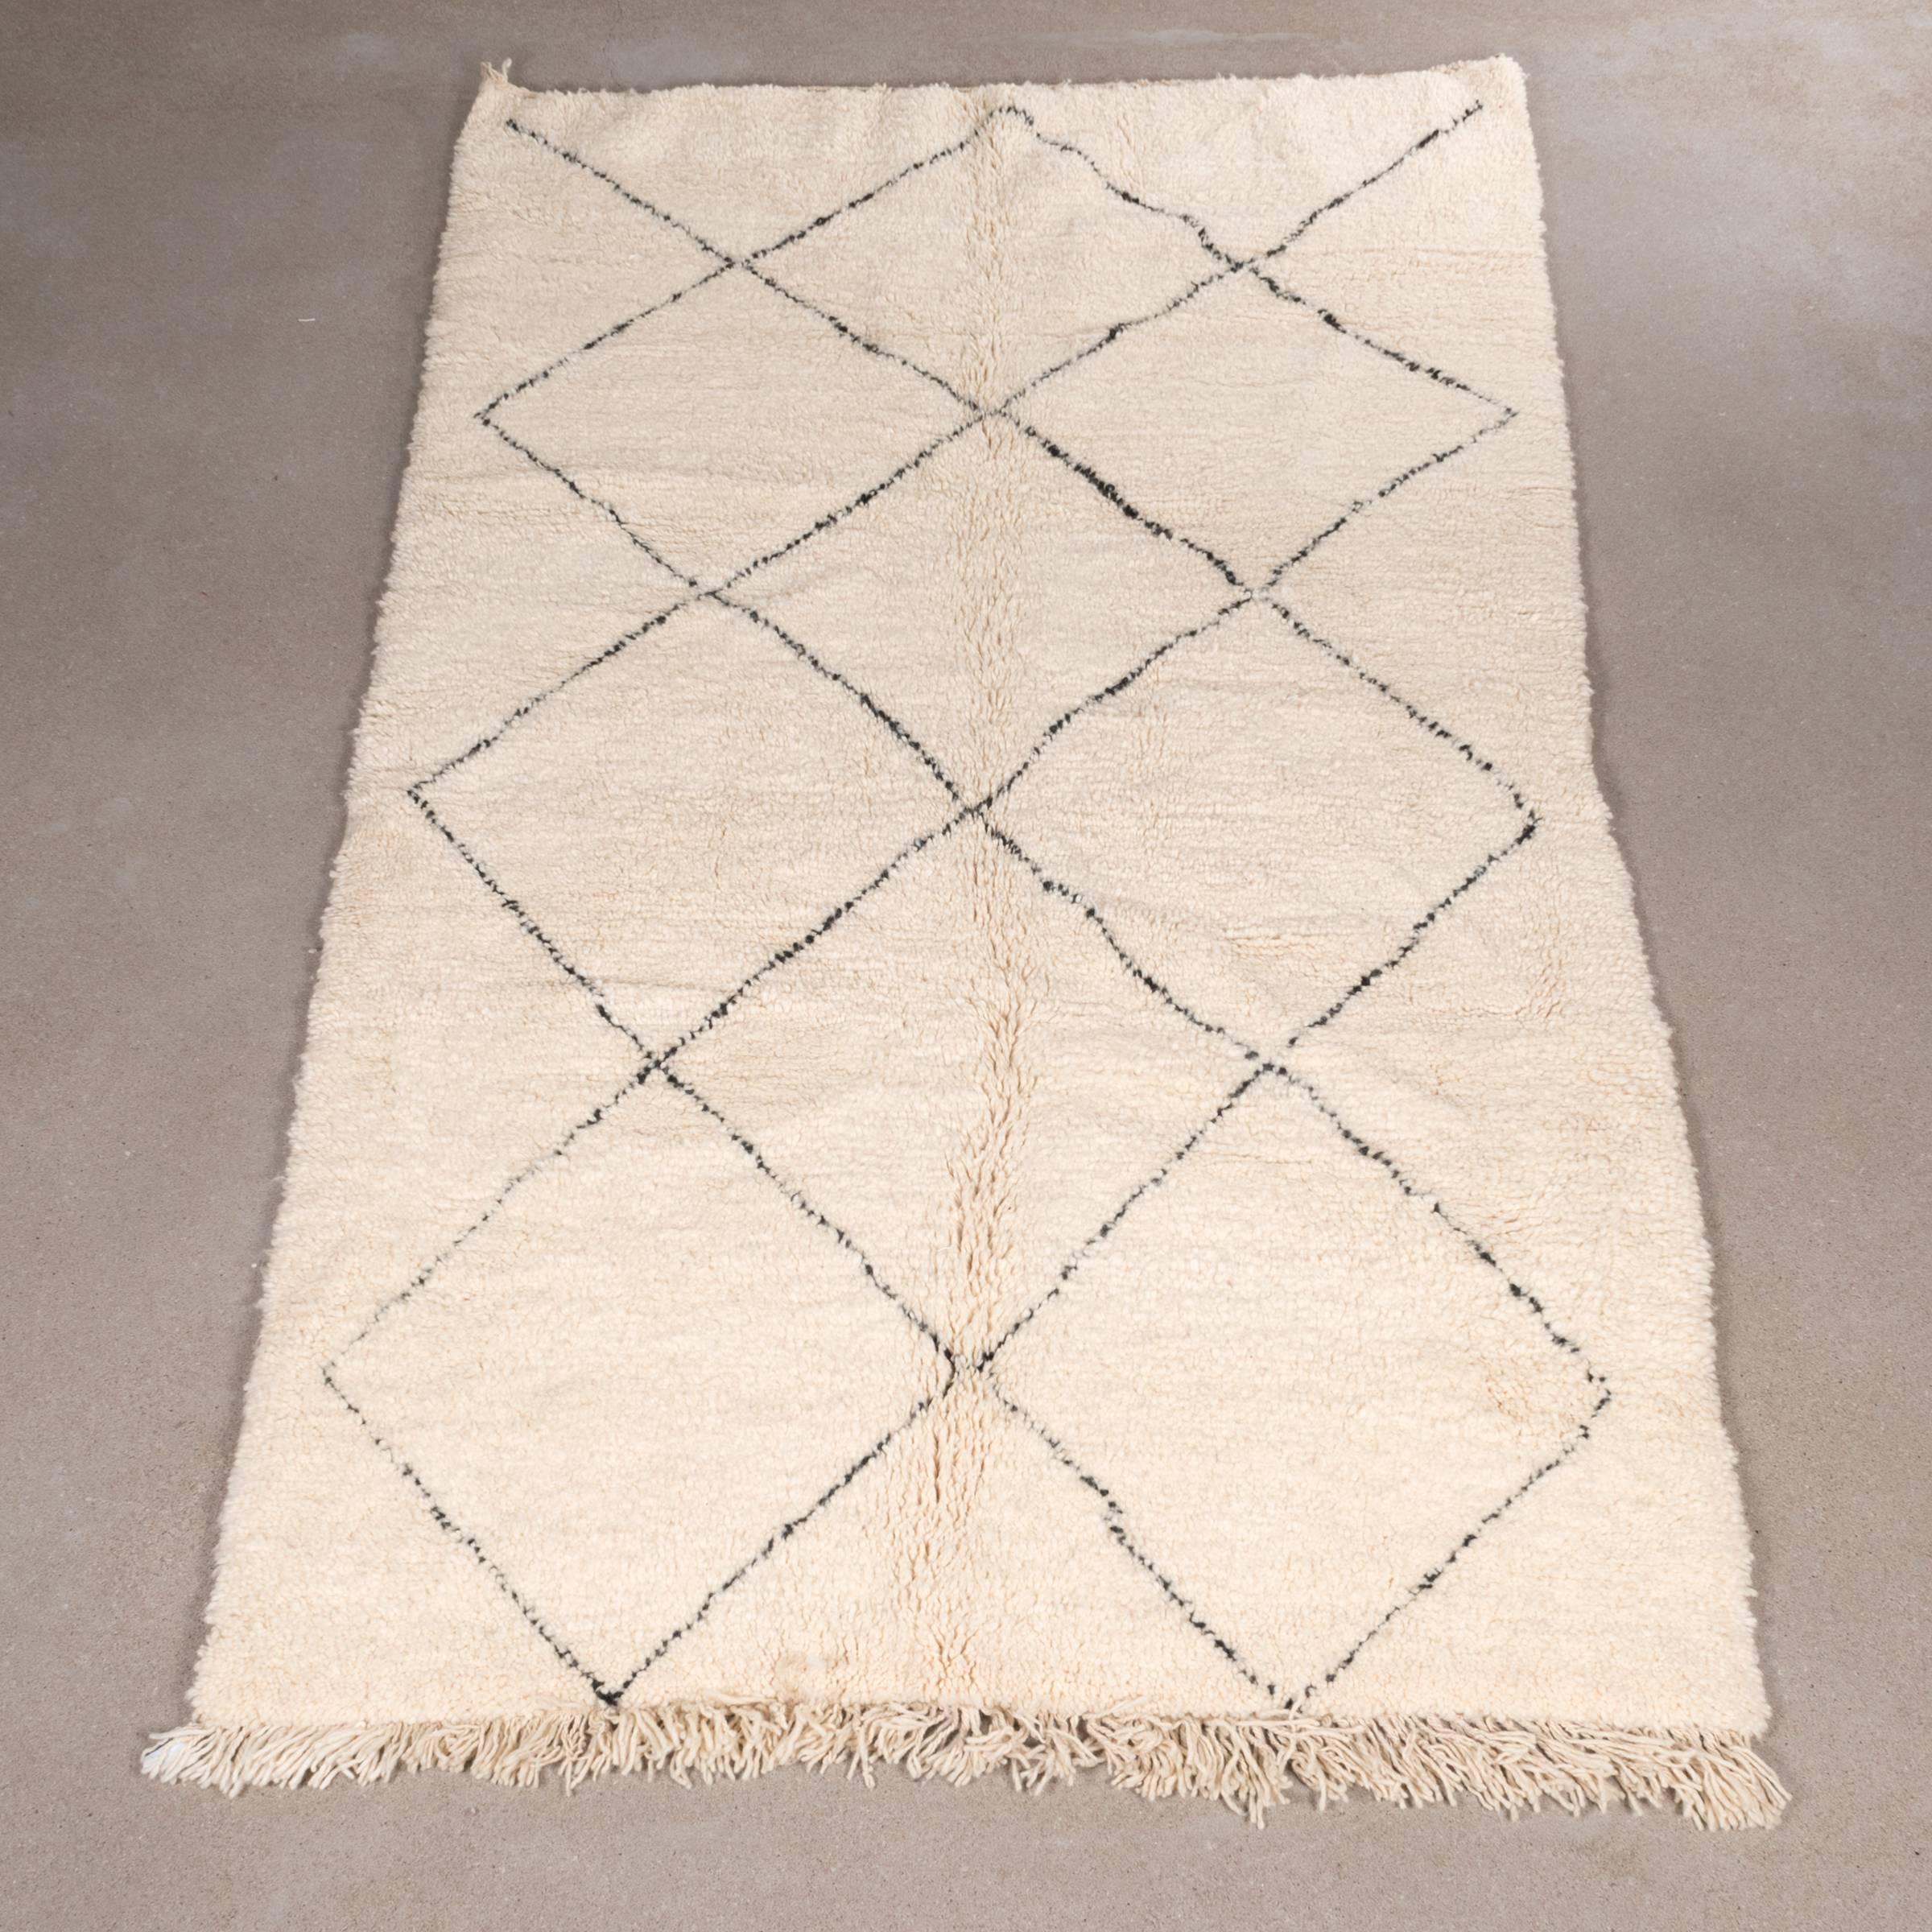 This vintage Beni Ourain rug is carefully selected in Morocco and has a soft ivory color due to the wool's natural color and are accompanied by dark grey stripes. The rugs are named after the Berber village 'Beni Ourain' in the mid-atlas mountain